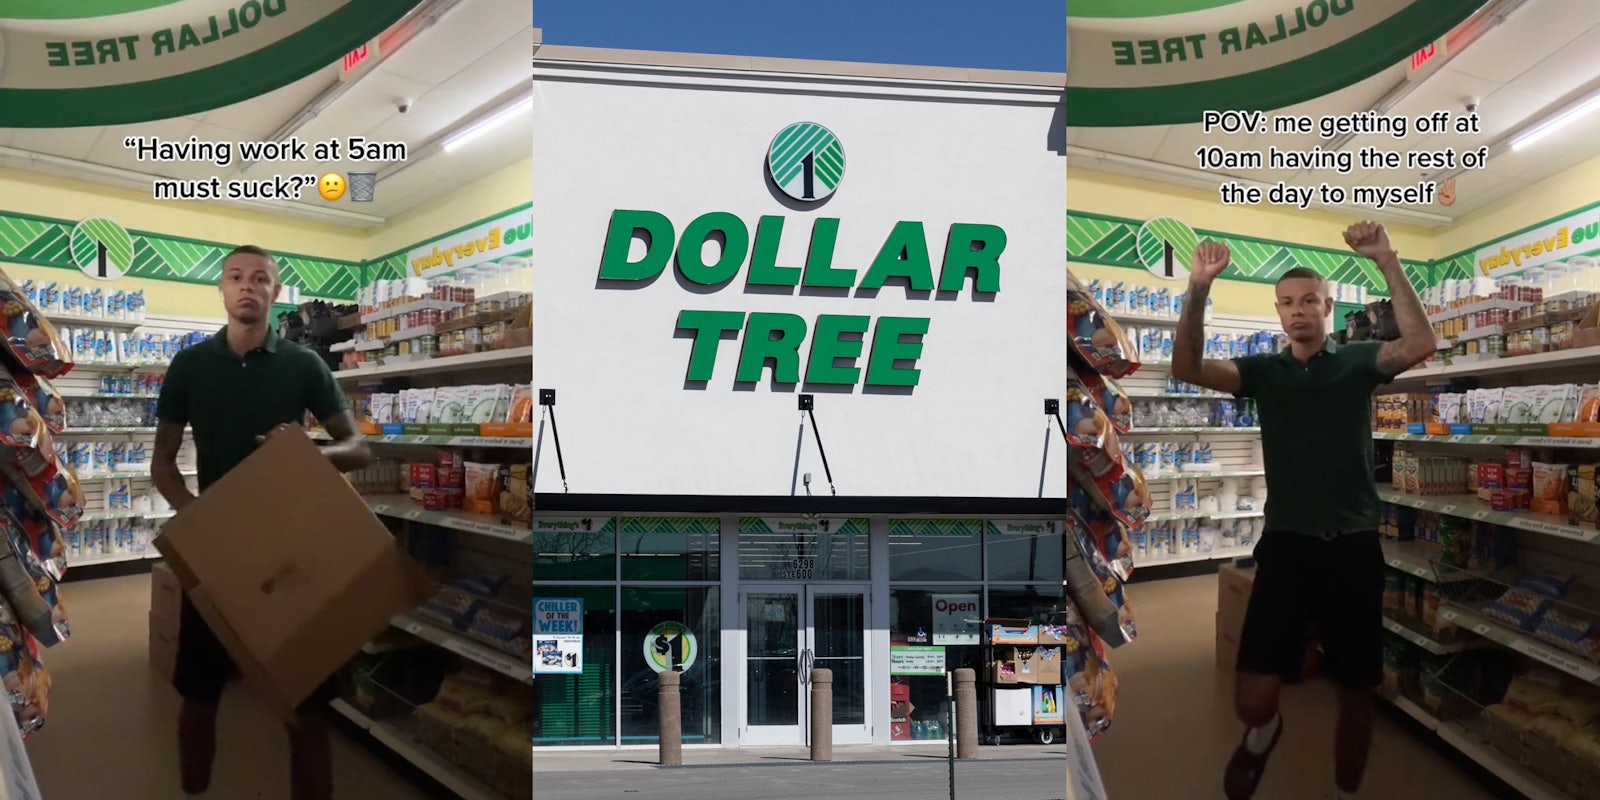 Dollar Tree employee with caption ''Having to work at 5am must suck?'' (l) Dollar Tree building with sign (c) Dollar Tree employee with caption 'POV: me getting off at 10am having the rest of the day to myself' (r)